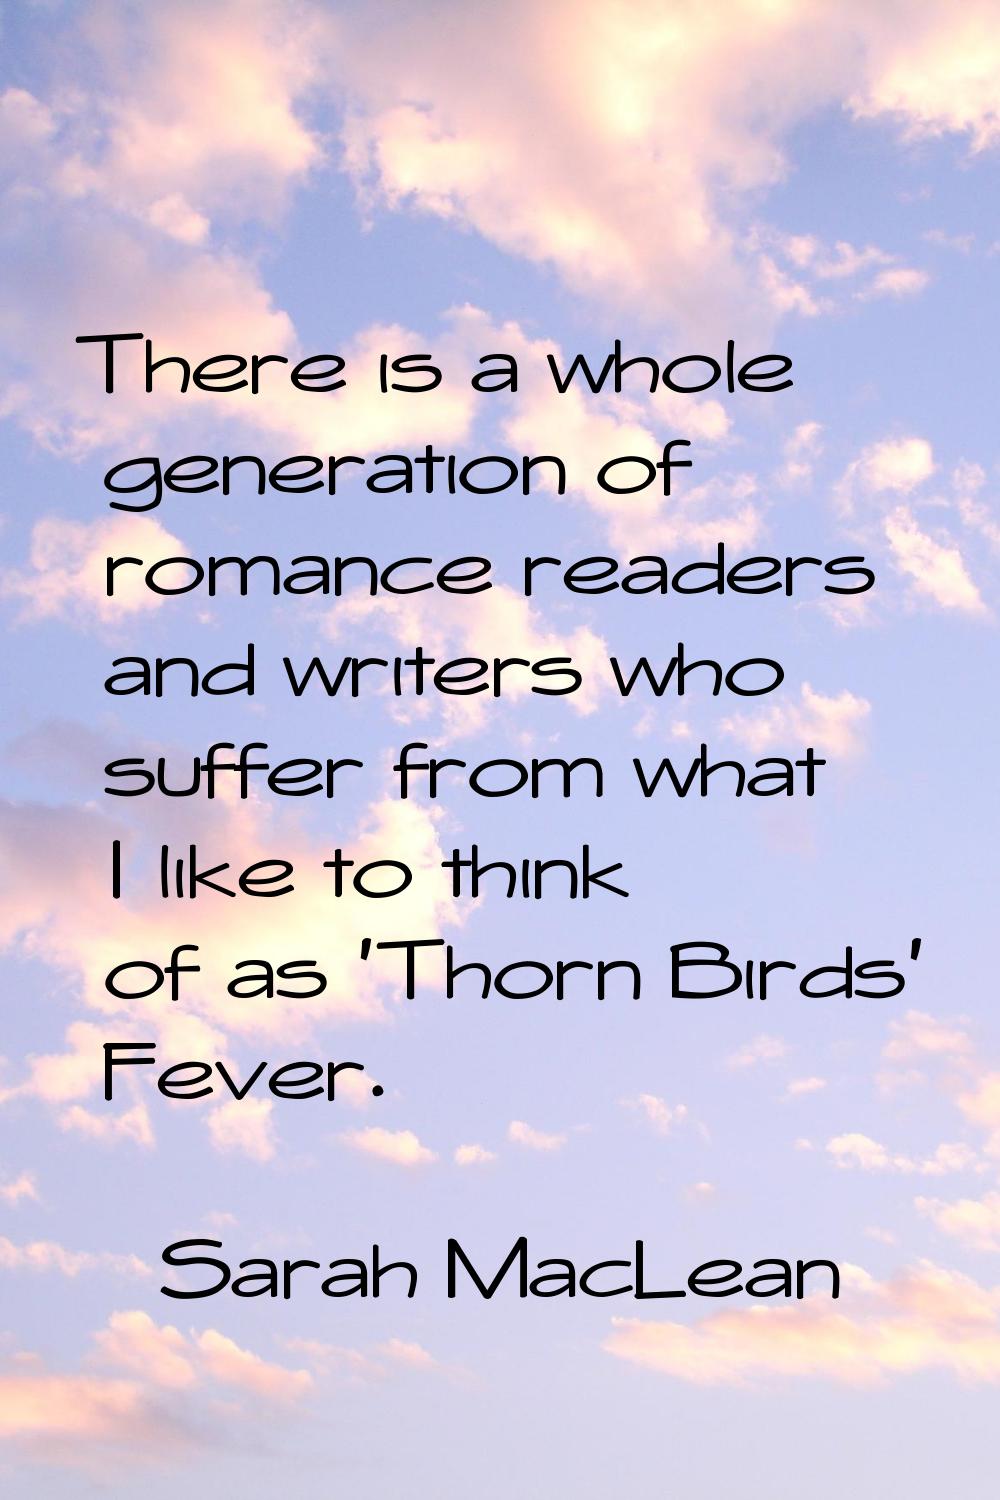 There is a whole generation of romance readers and writers who suffer from what I like to think of 